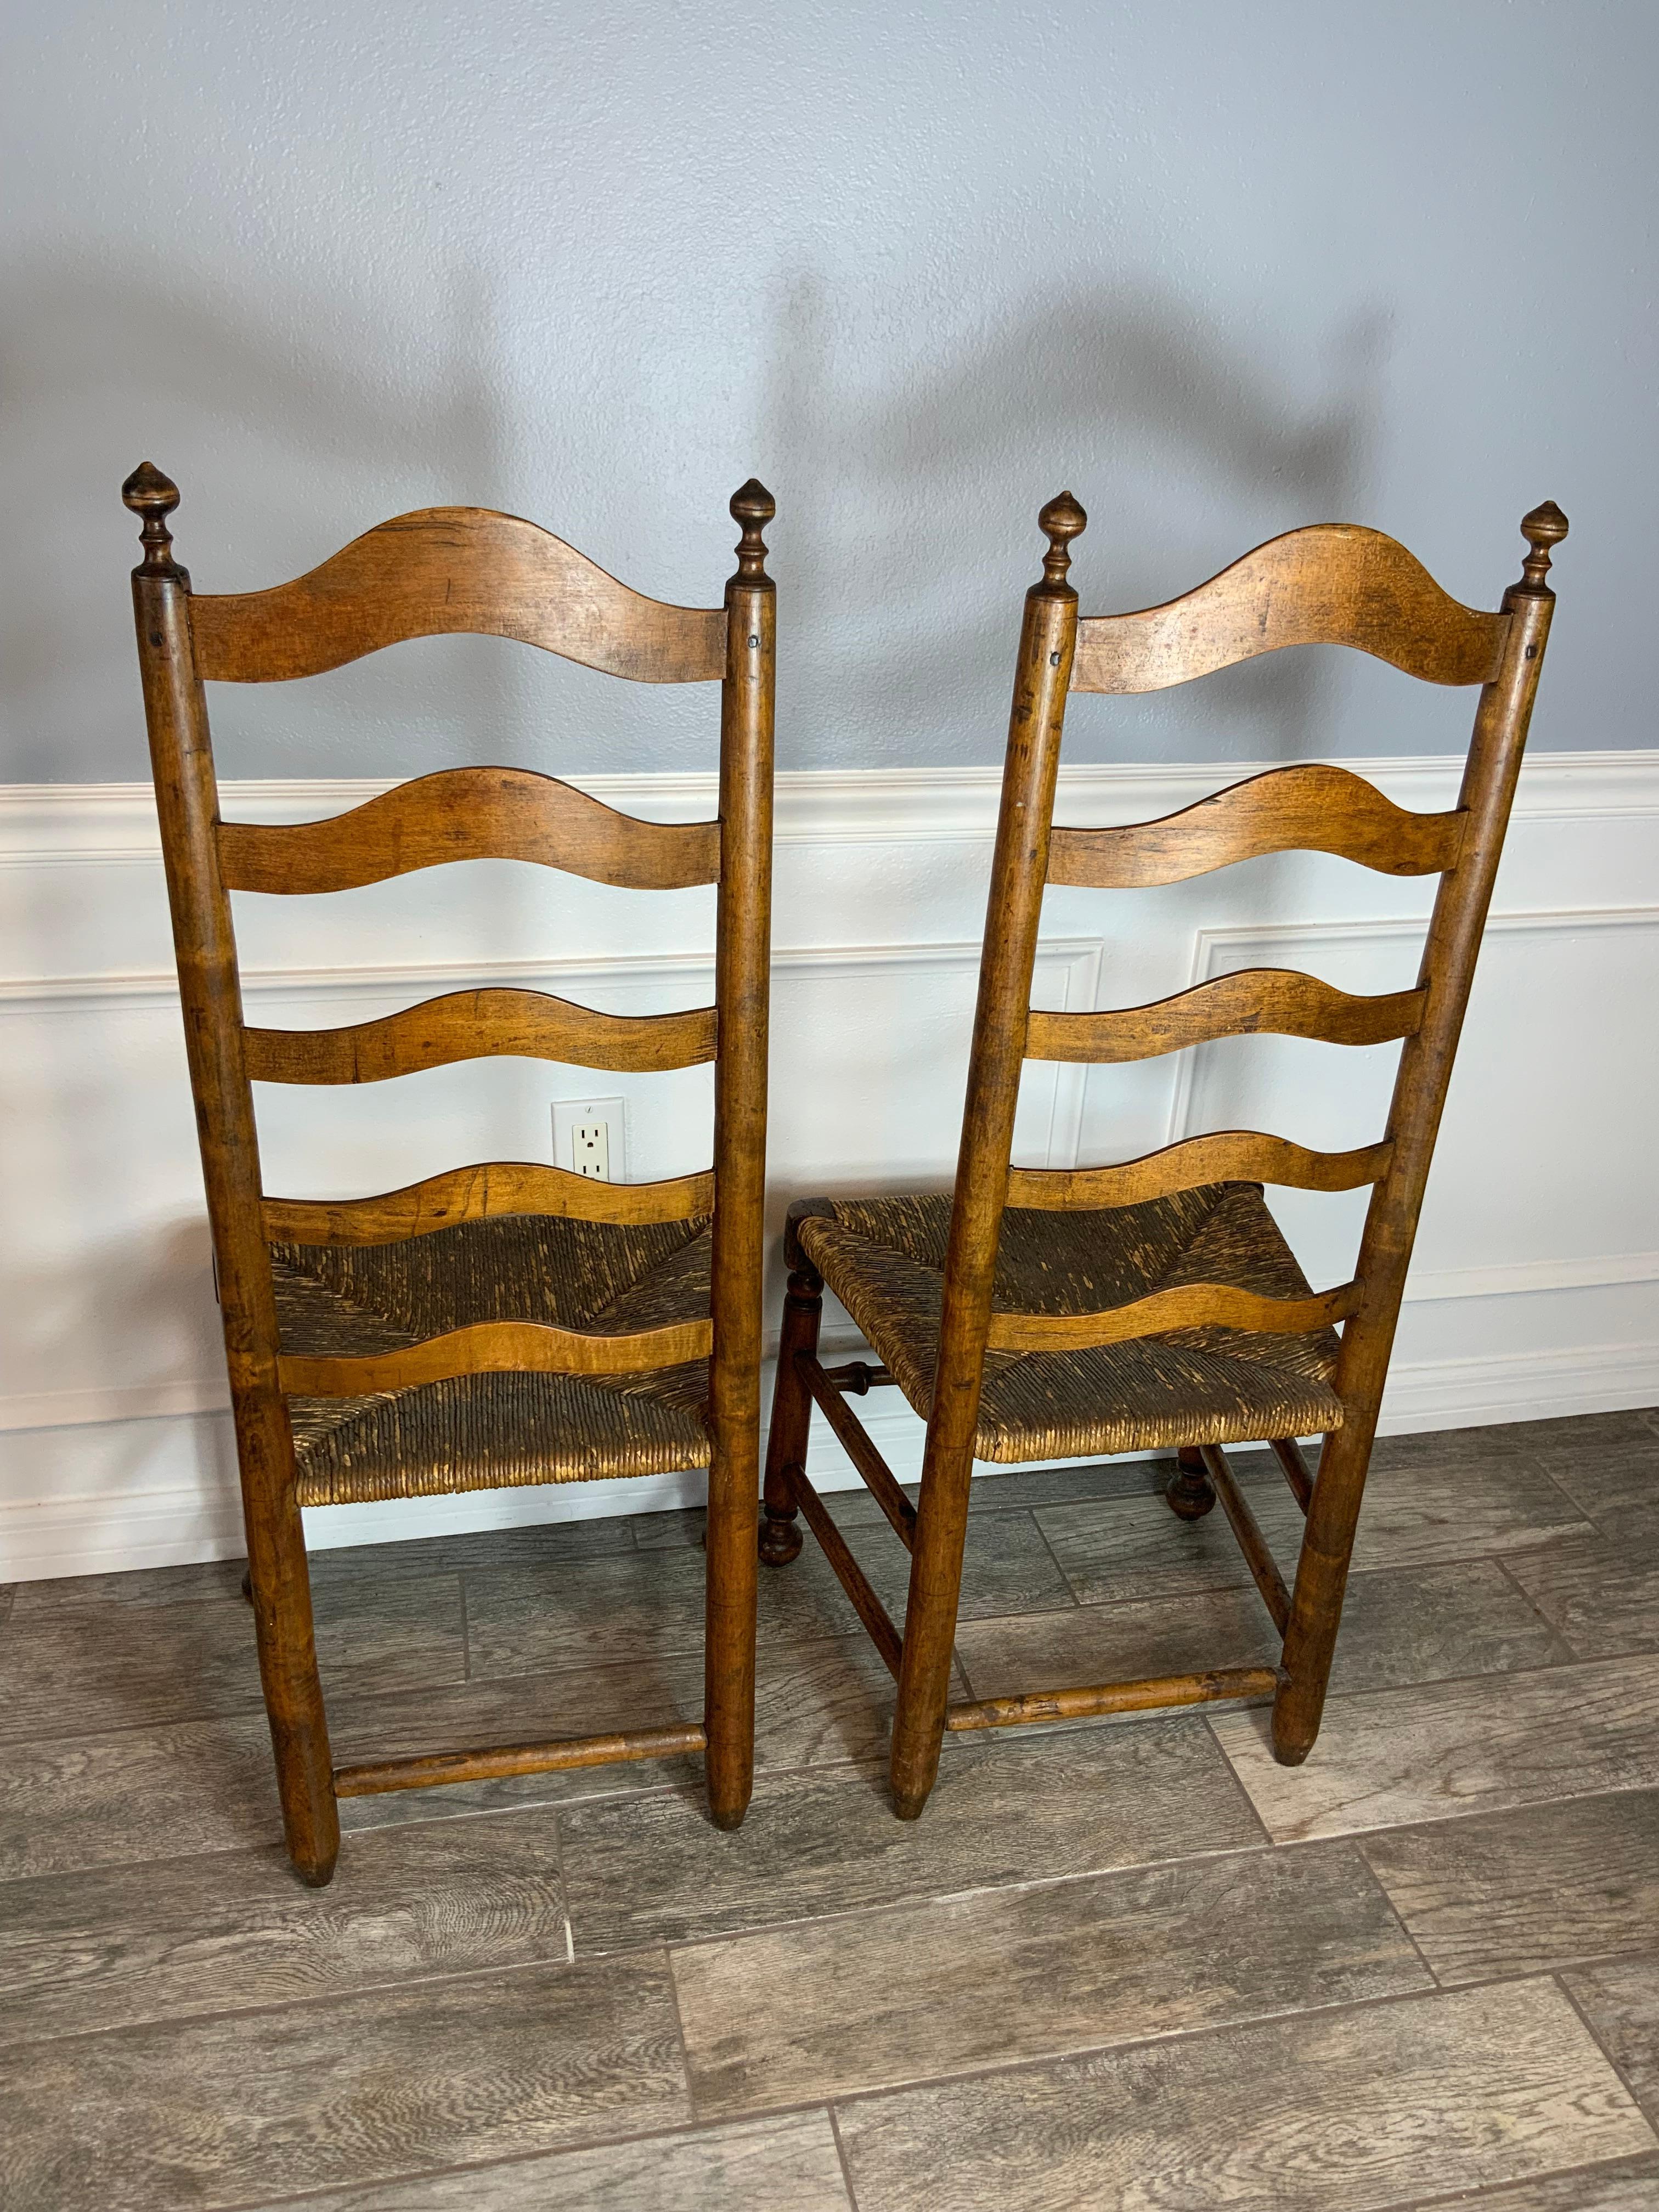 Very nice clean matching pair of Maple Delaware River Valley arched five slat Ladder Back side chairs.  Straight rounded stiles topped with inverted turnip shaped finials.  Five graduated arched shaped slats with the top slat tenon pegged.  Turned